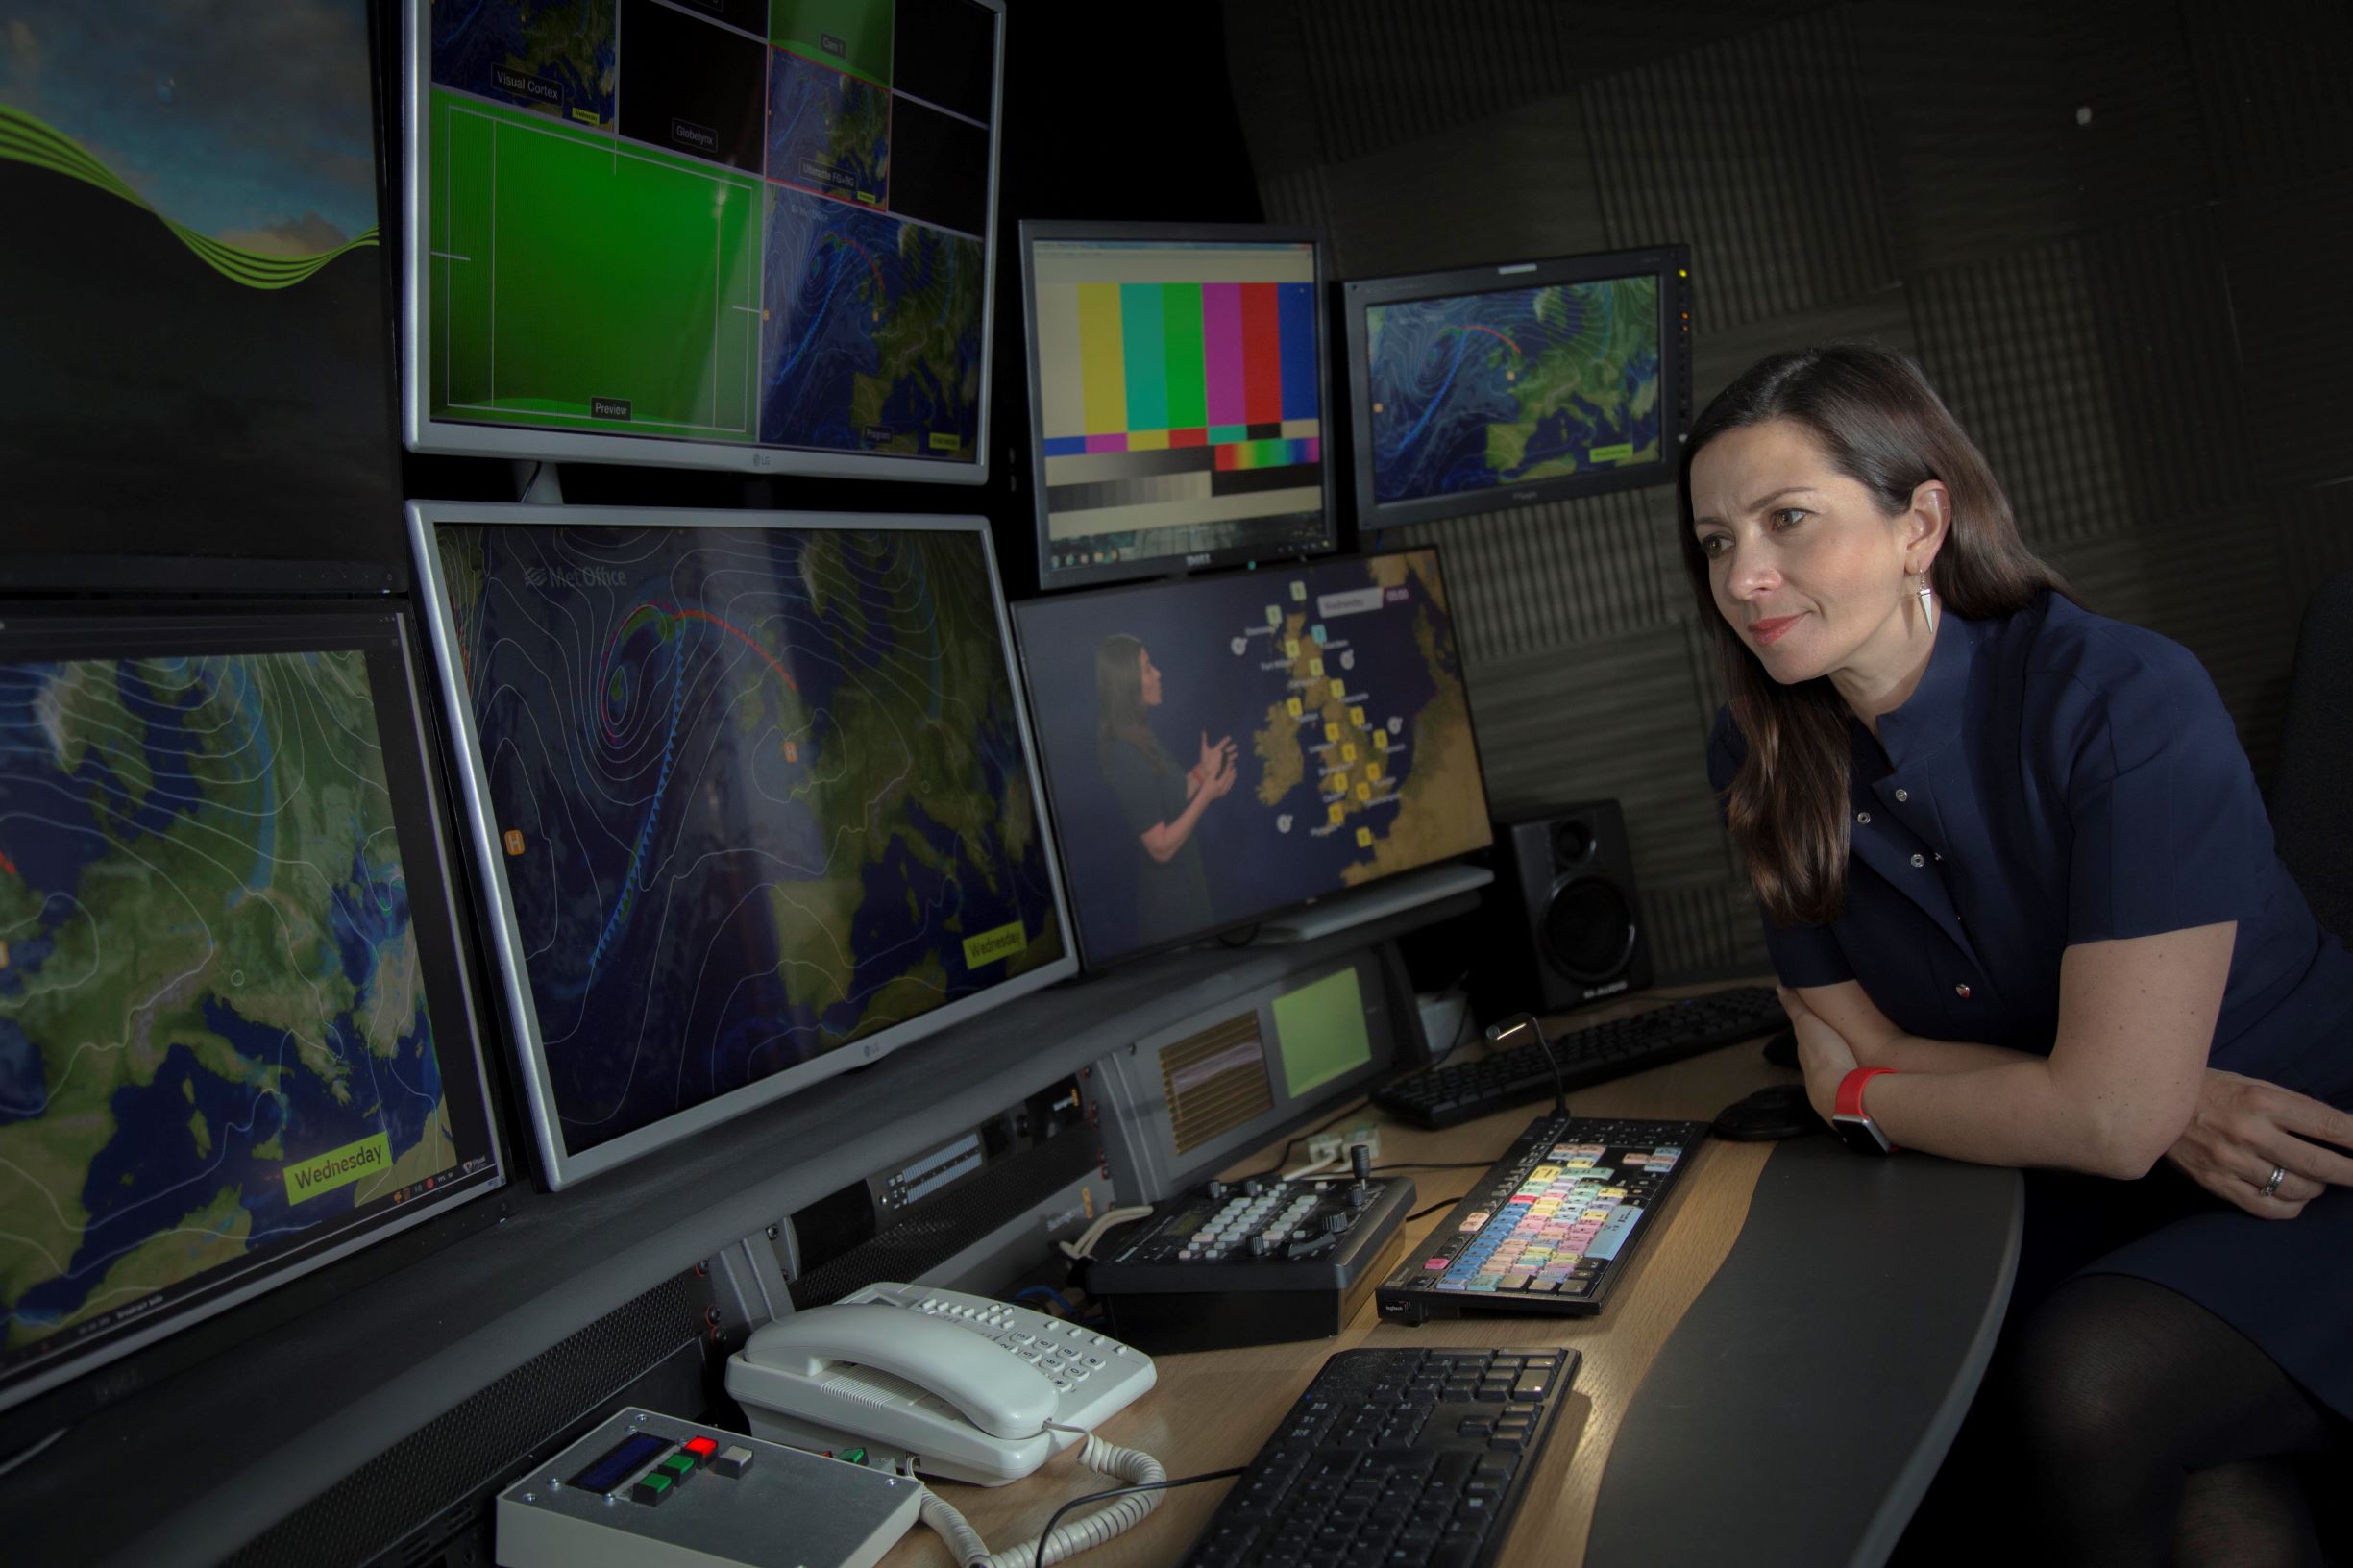 Clare Nasir looks at some monitors showing weather maps and a broadcast of the weather forecast.